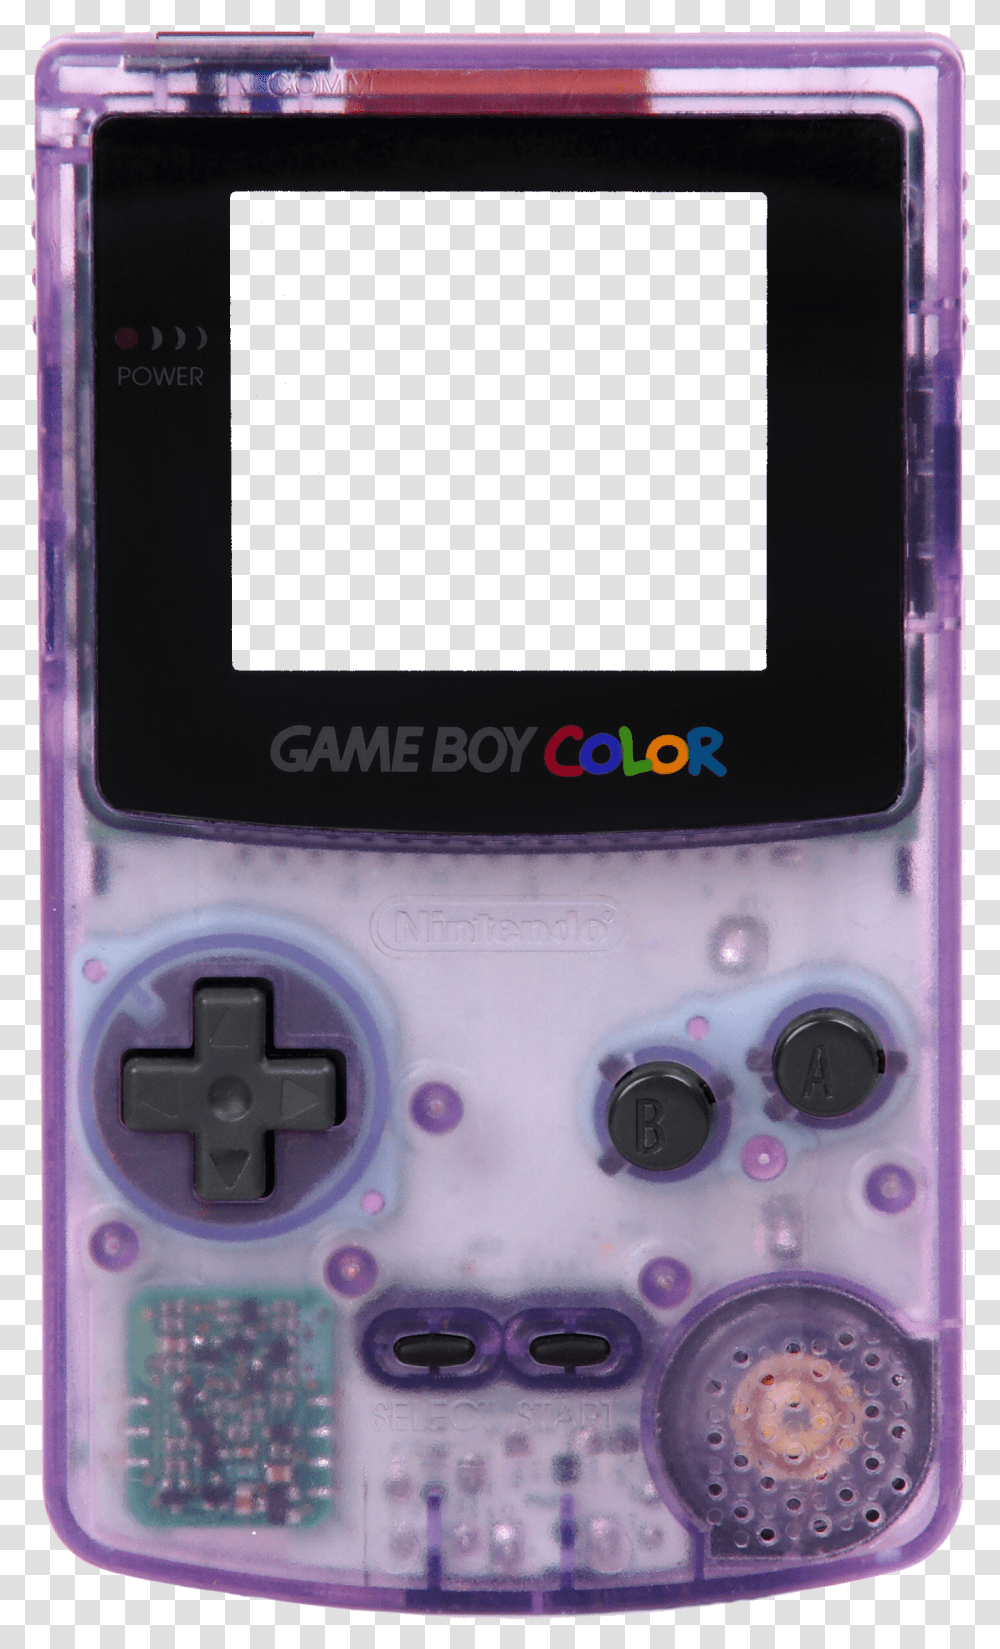 Gameboy Cyber Messy Purple Game Sticker By Peo Gameboy Color Atomic Purple Transparent Png